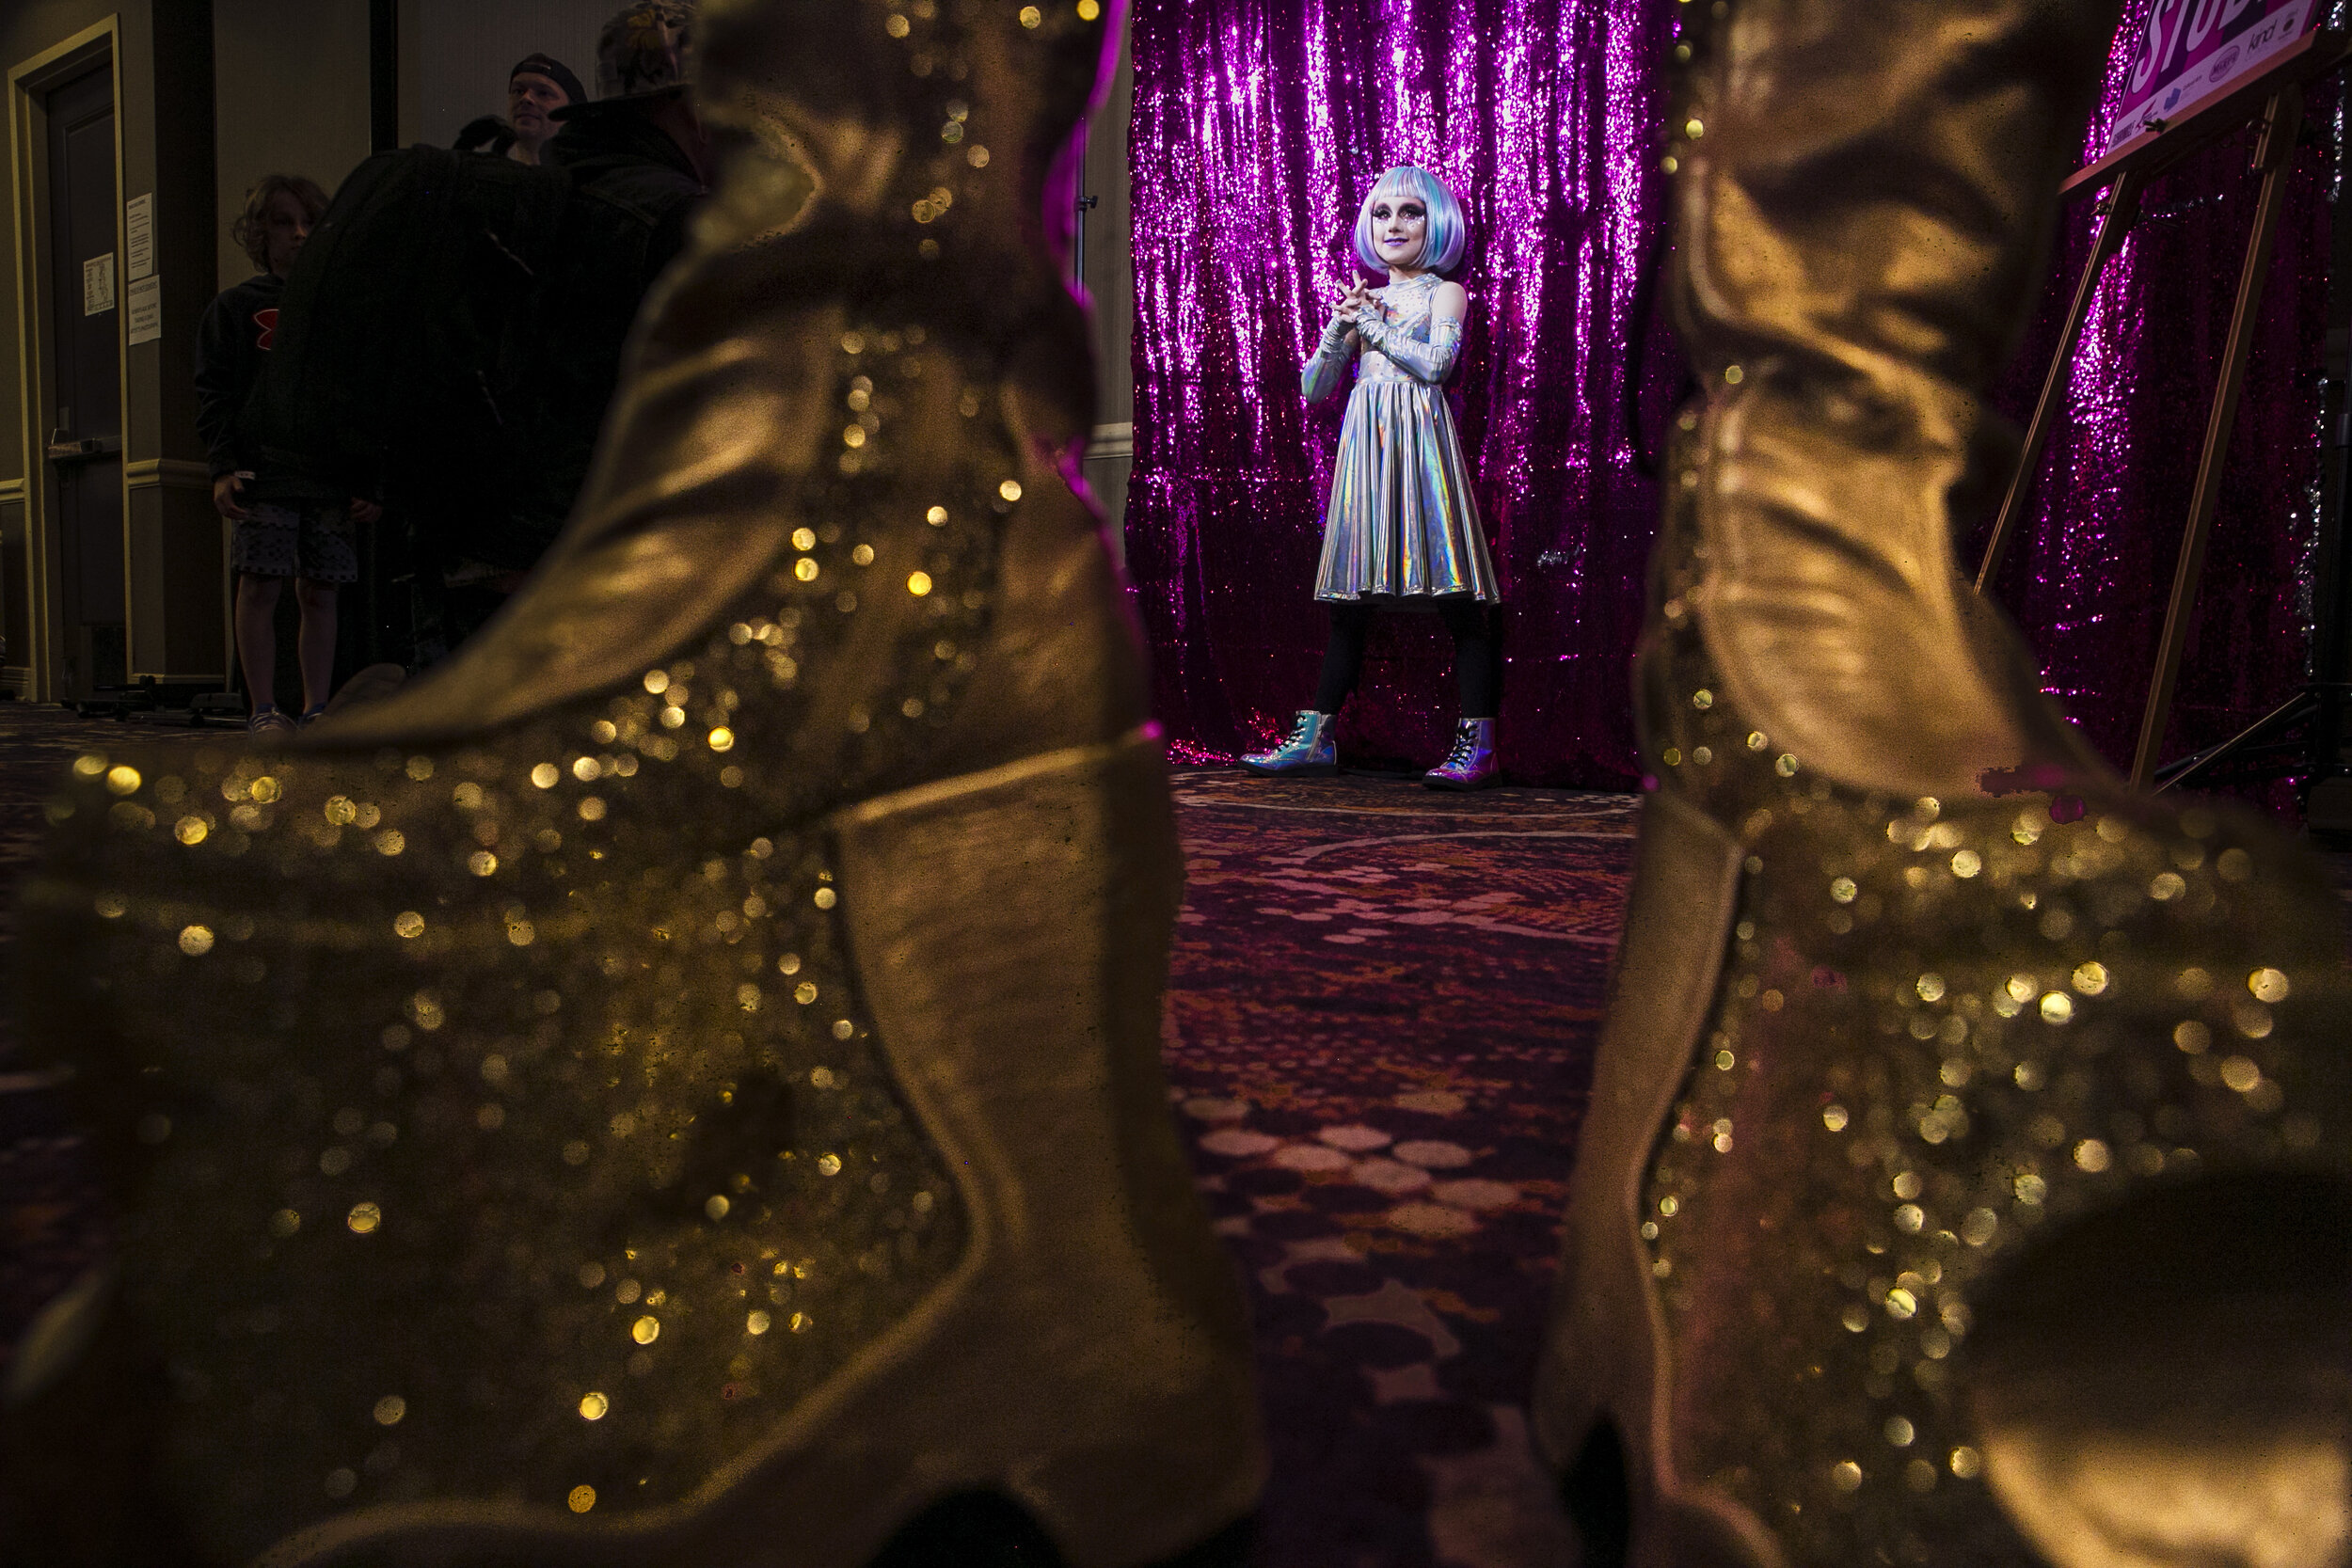  Keegan, a gender creative child, drag name KweenKeekee, then 8, is framed by the shoes of another performer while posing for the camera after completing his first drag performance during the Austin International Drag Fest 2018 in Austin, Texas, U.S.